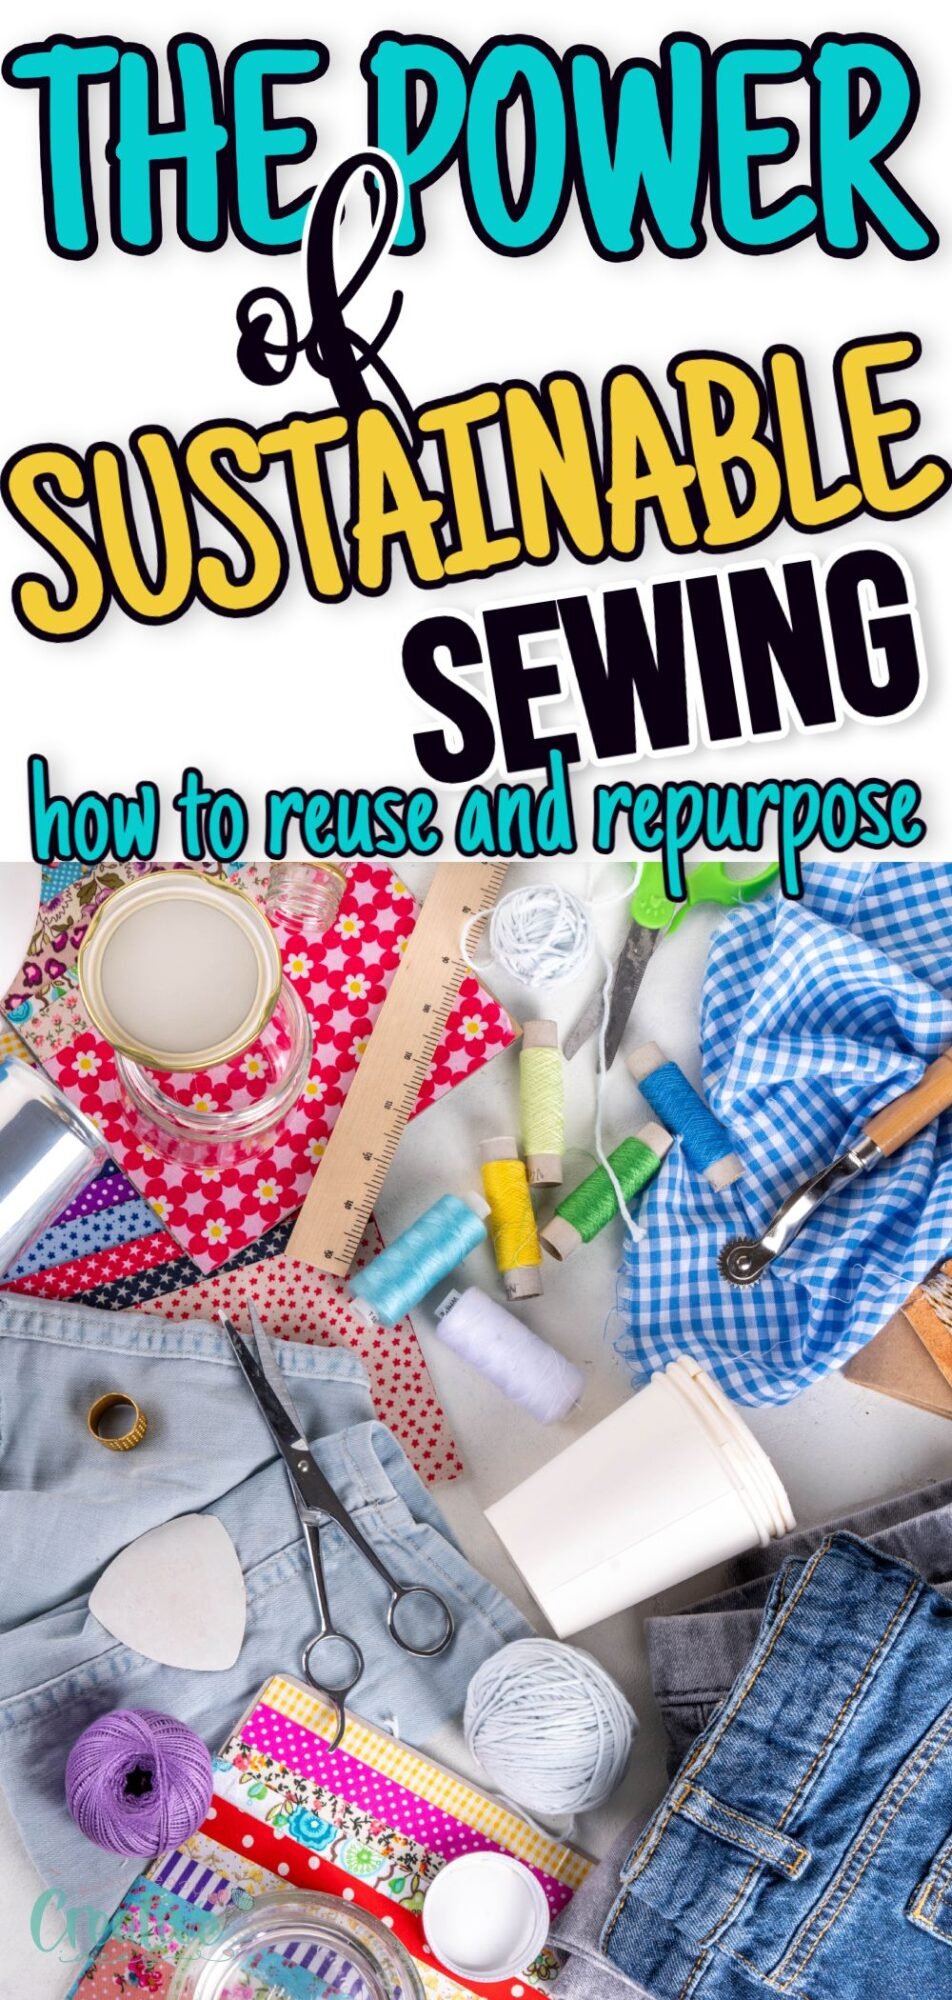 Sustainable sewing is an empowering approach that not only benefits the environment but also unleashes creativity.